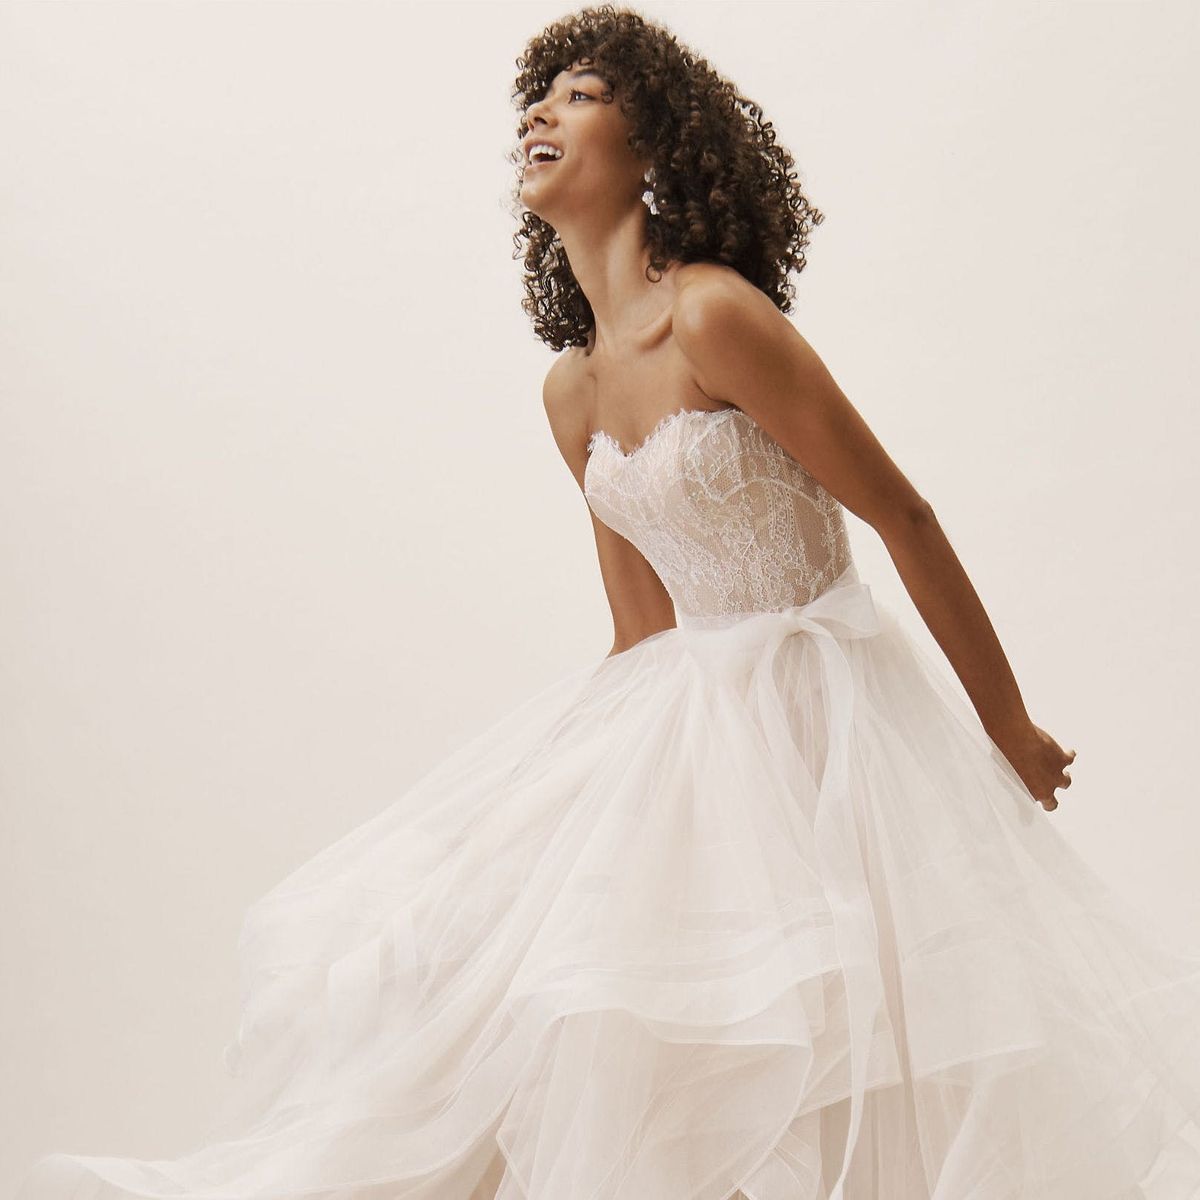 14 Under-$1000 Wedding Dresses for Flat-Chested Brides